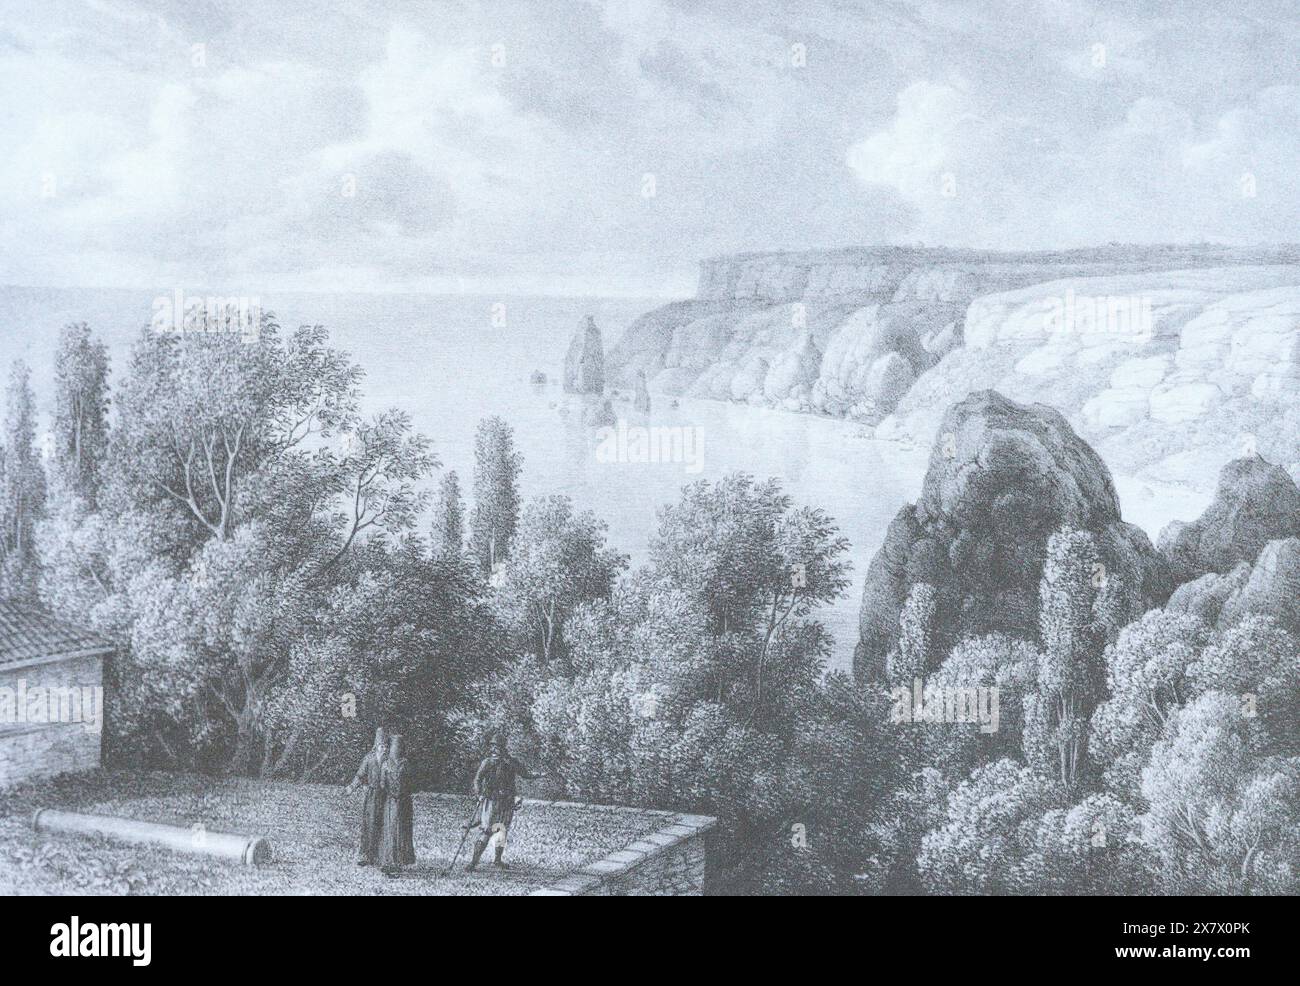 Cape Fiolent in Crimea. Engraving by Karl Kügelchen from the 19th century. Stock Photo